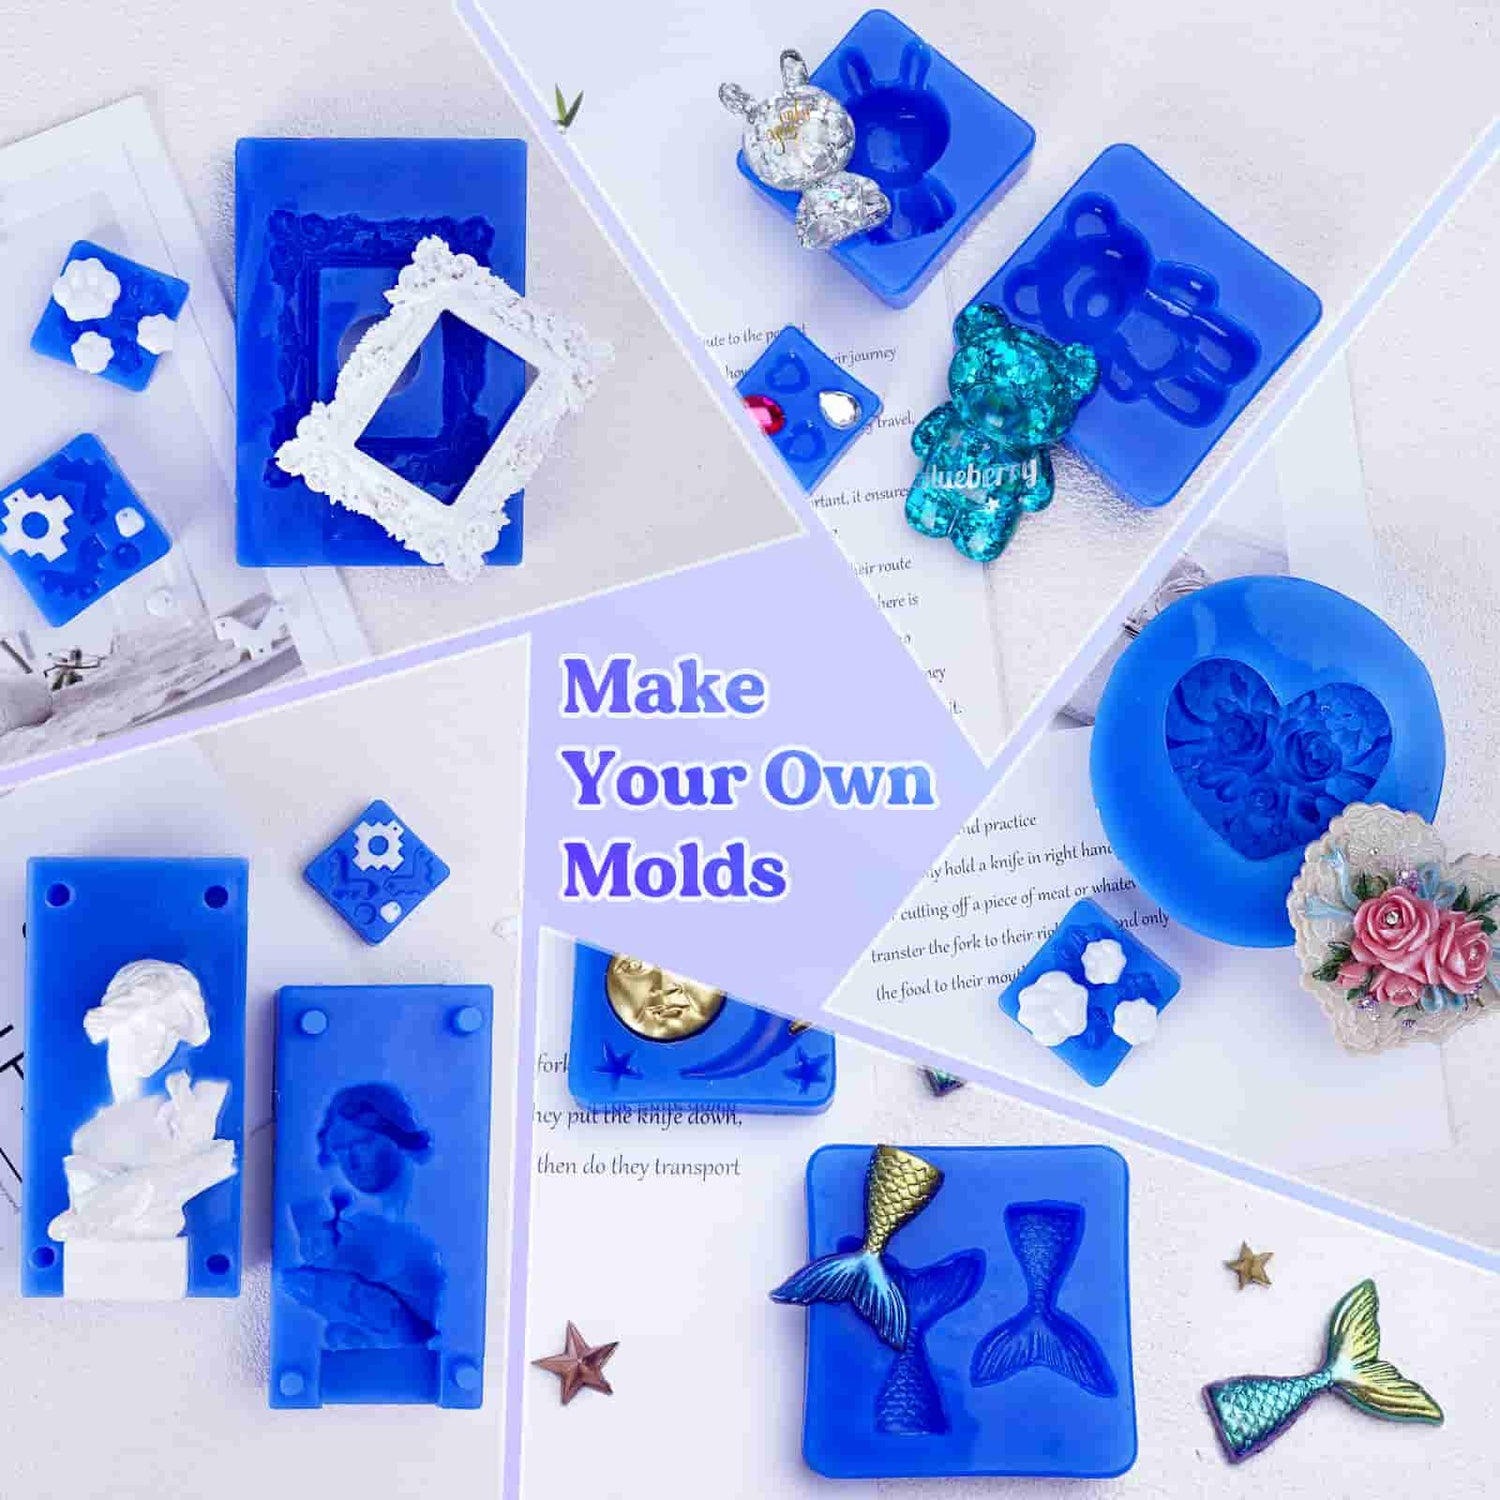 LET'S RESIN Silicone Mold Making Kit, 30A Liquid Silicone Rubber, 32 oz  Non-Toxic, Odorless - 1:1 Mixing Ratio Silicone for DIY Resin Mold, Casting,  Candle Making Molds, Soap Making Molds(Blue) – Let's Resin